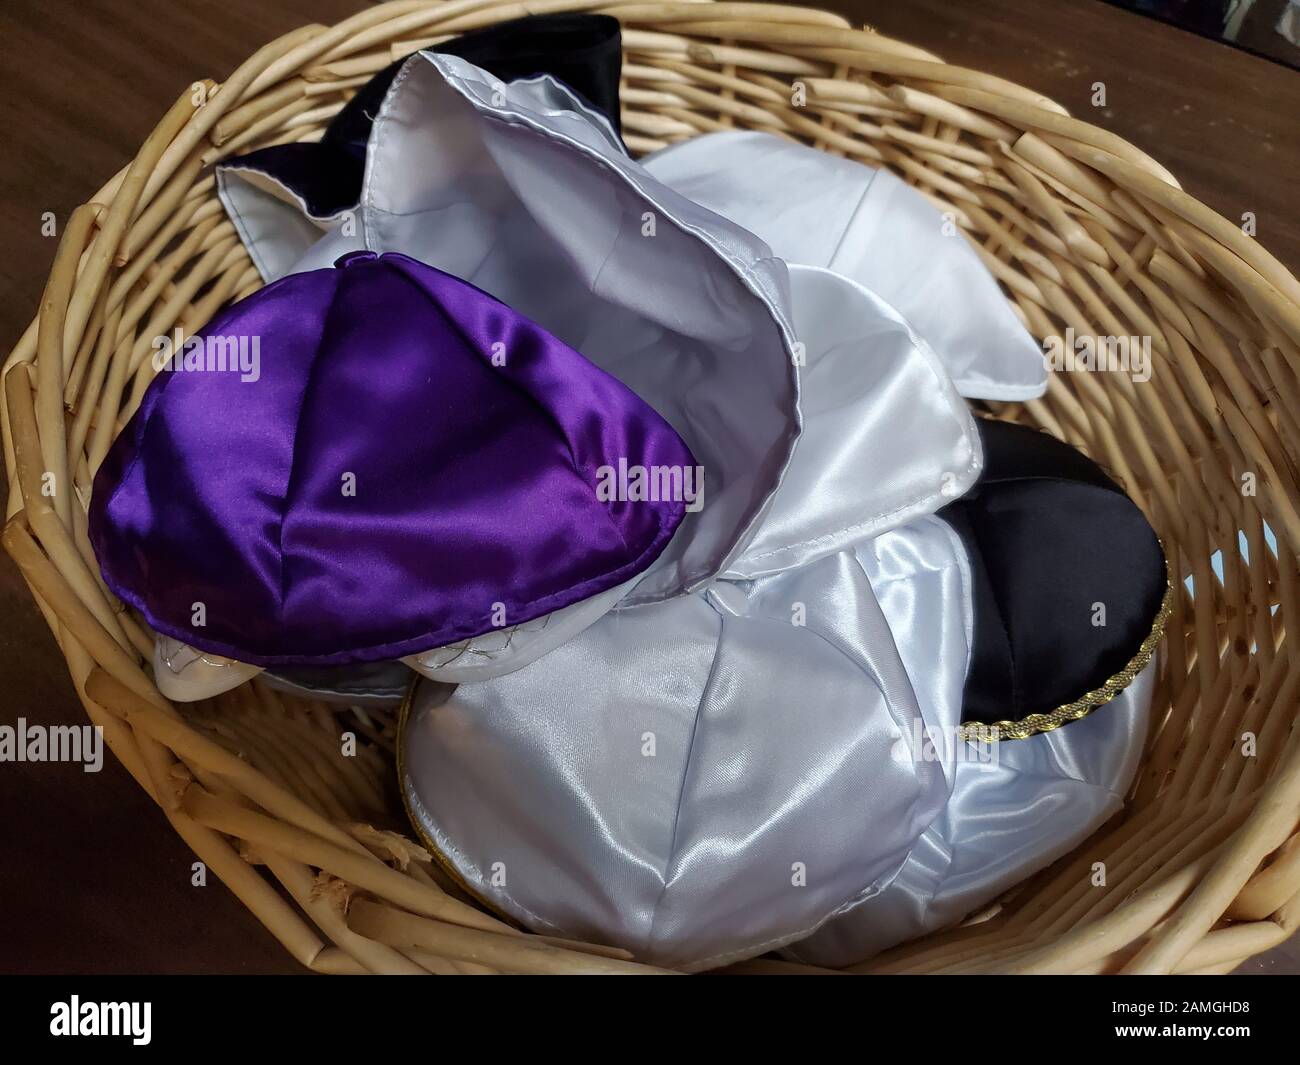 Close-up of ceremonial Keepa or Yarmulke skullcaps, worn in the Jewish religion during prayer and when entering holy spaces, Lafayette, California, December 4, 2019. () Stock Photo